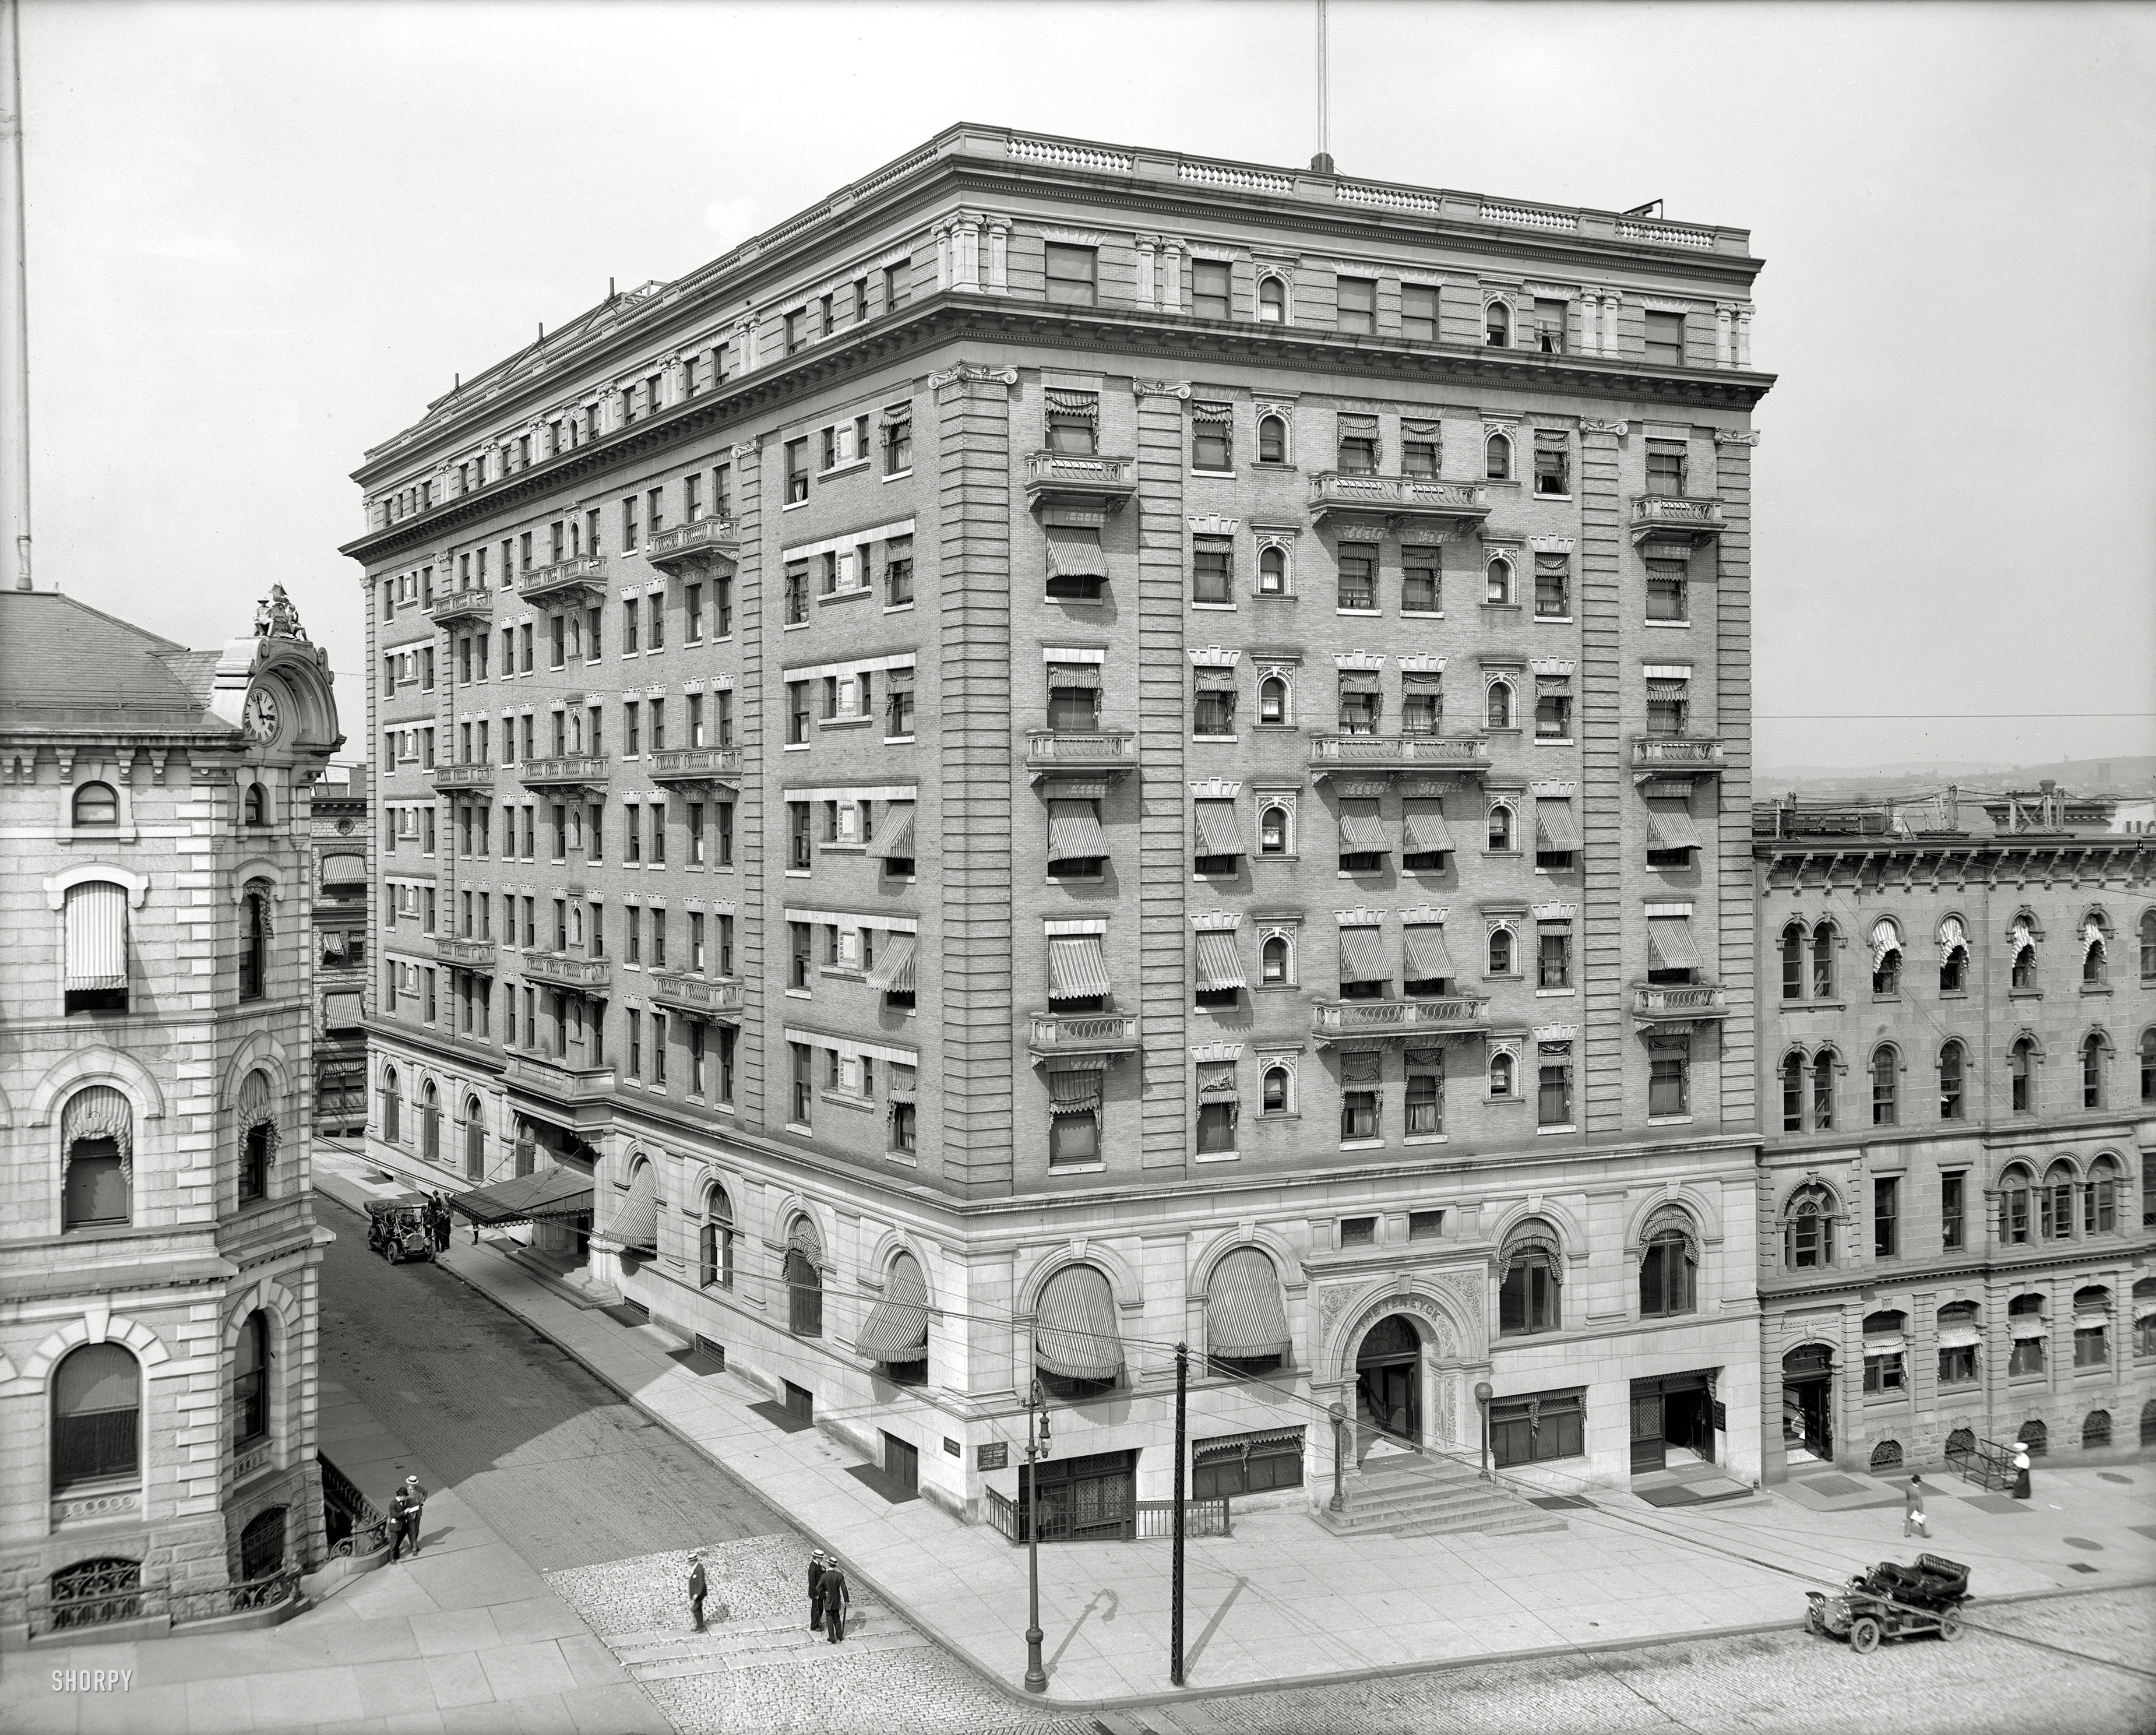 Albany, New York, circa 1908. "The Ten Eyck." At two fifty-seven. 8x10 inch dry plate glass negative, Detroit Publishing Company. View full size.